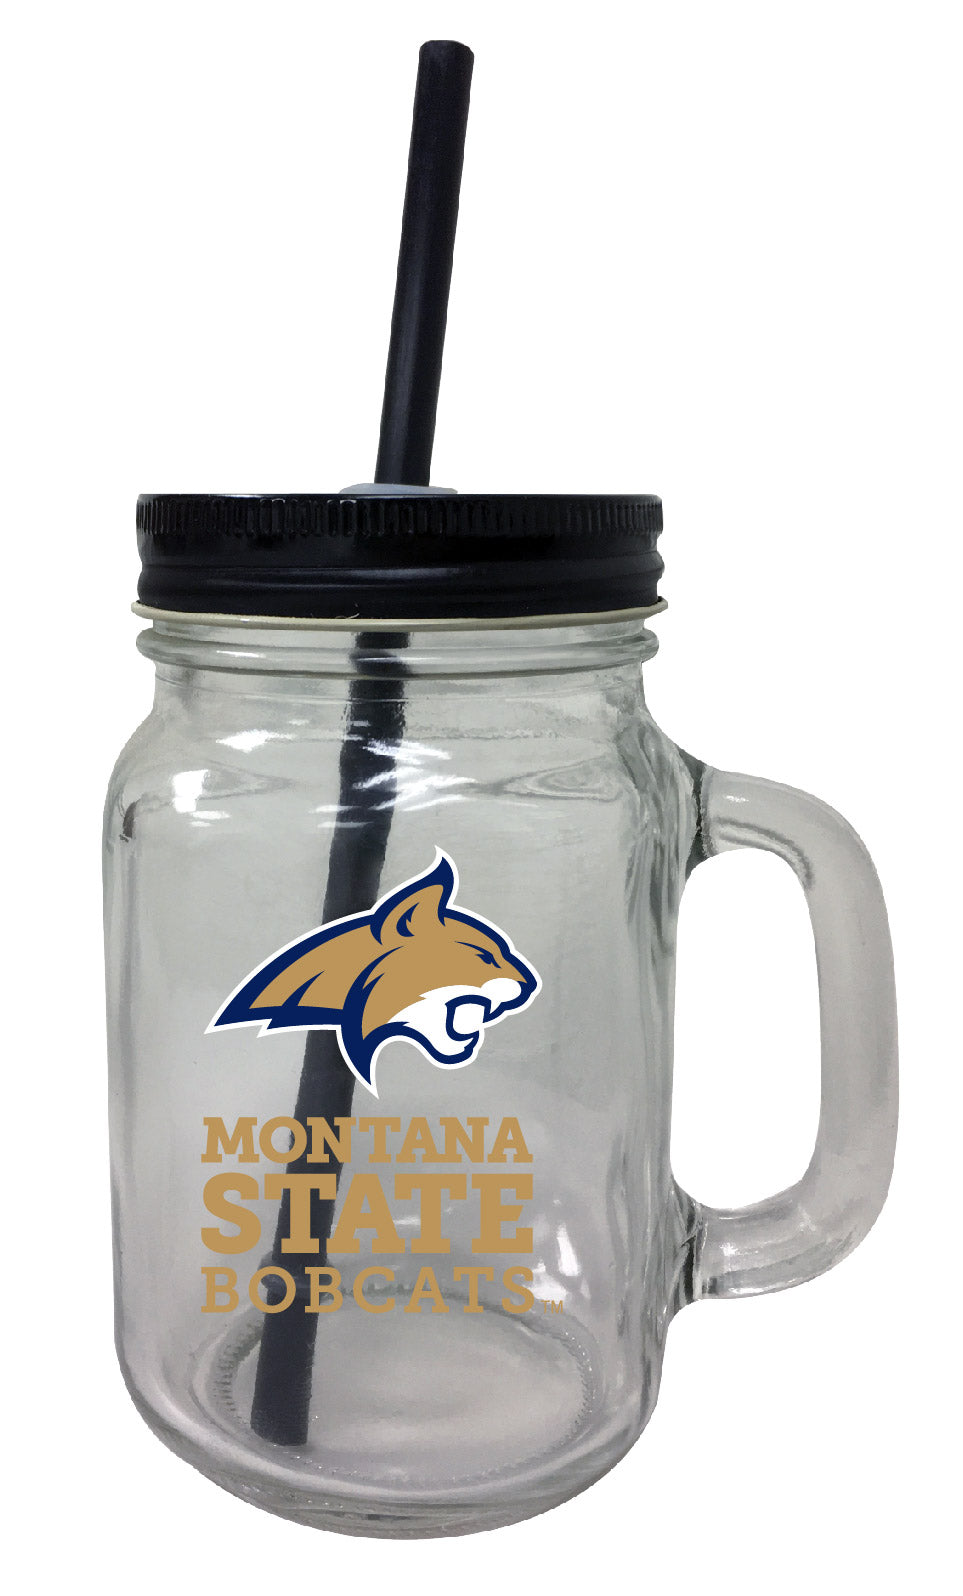 Montana State Bobcats NCAA Iconic Mason Jar Glass - Officially Licensed Collegiate Drinkware with Lid and Straw 2-Pack